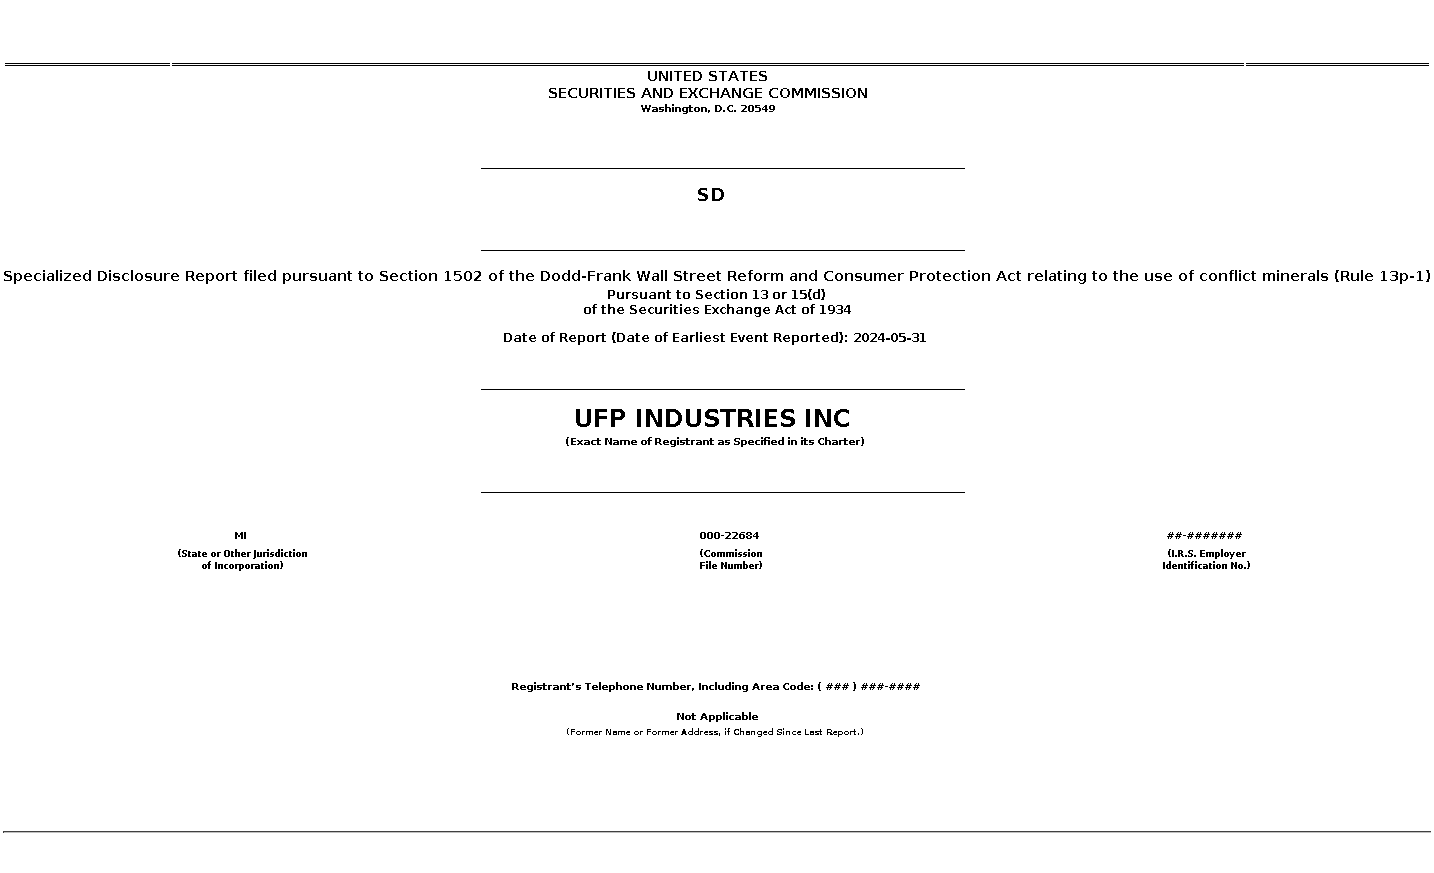 UFPI : SD Specialized Disclosure Report filed pursuant to Section 1502 of the Dodd-Frank Wall Street Reform and Consumer Protection Act relating to the use of conflict minerals (Rule 13p-1)